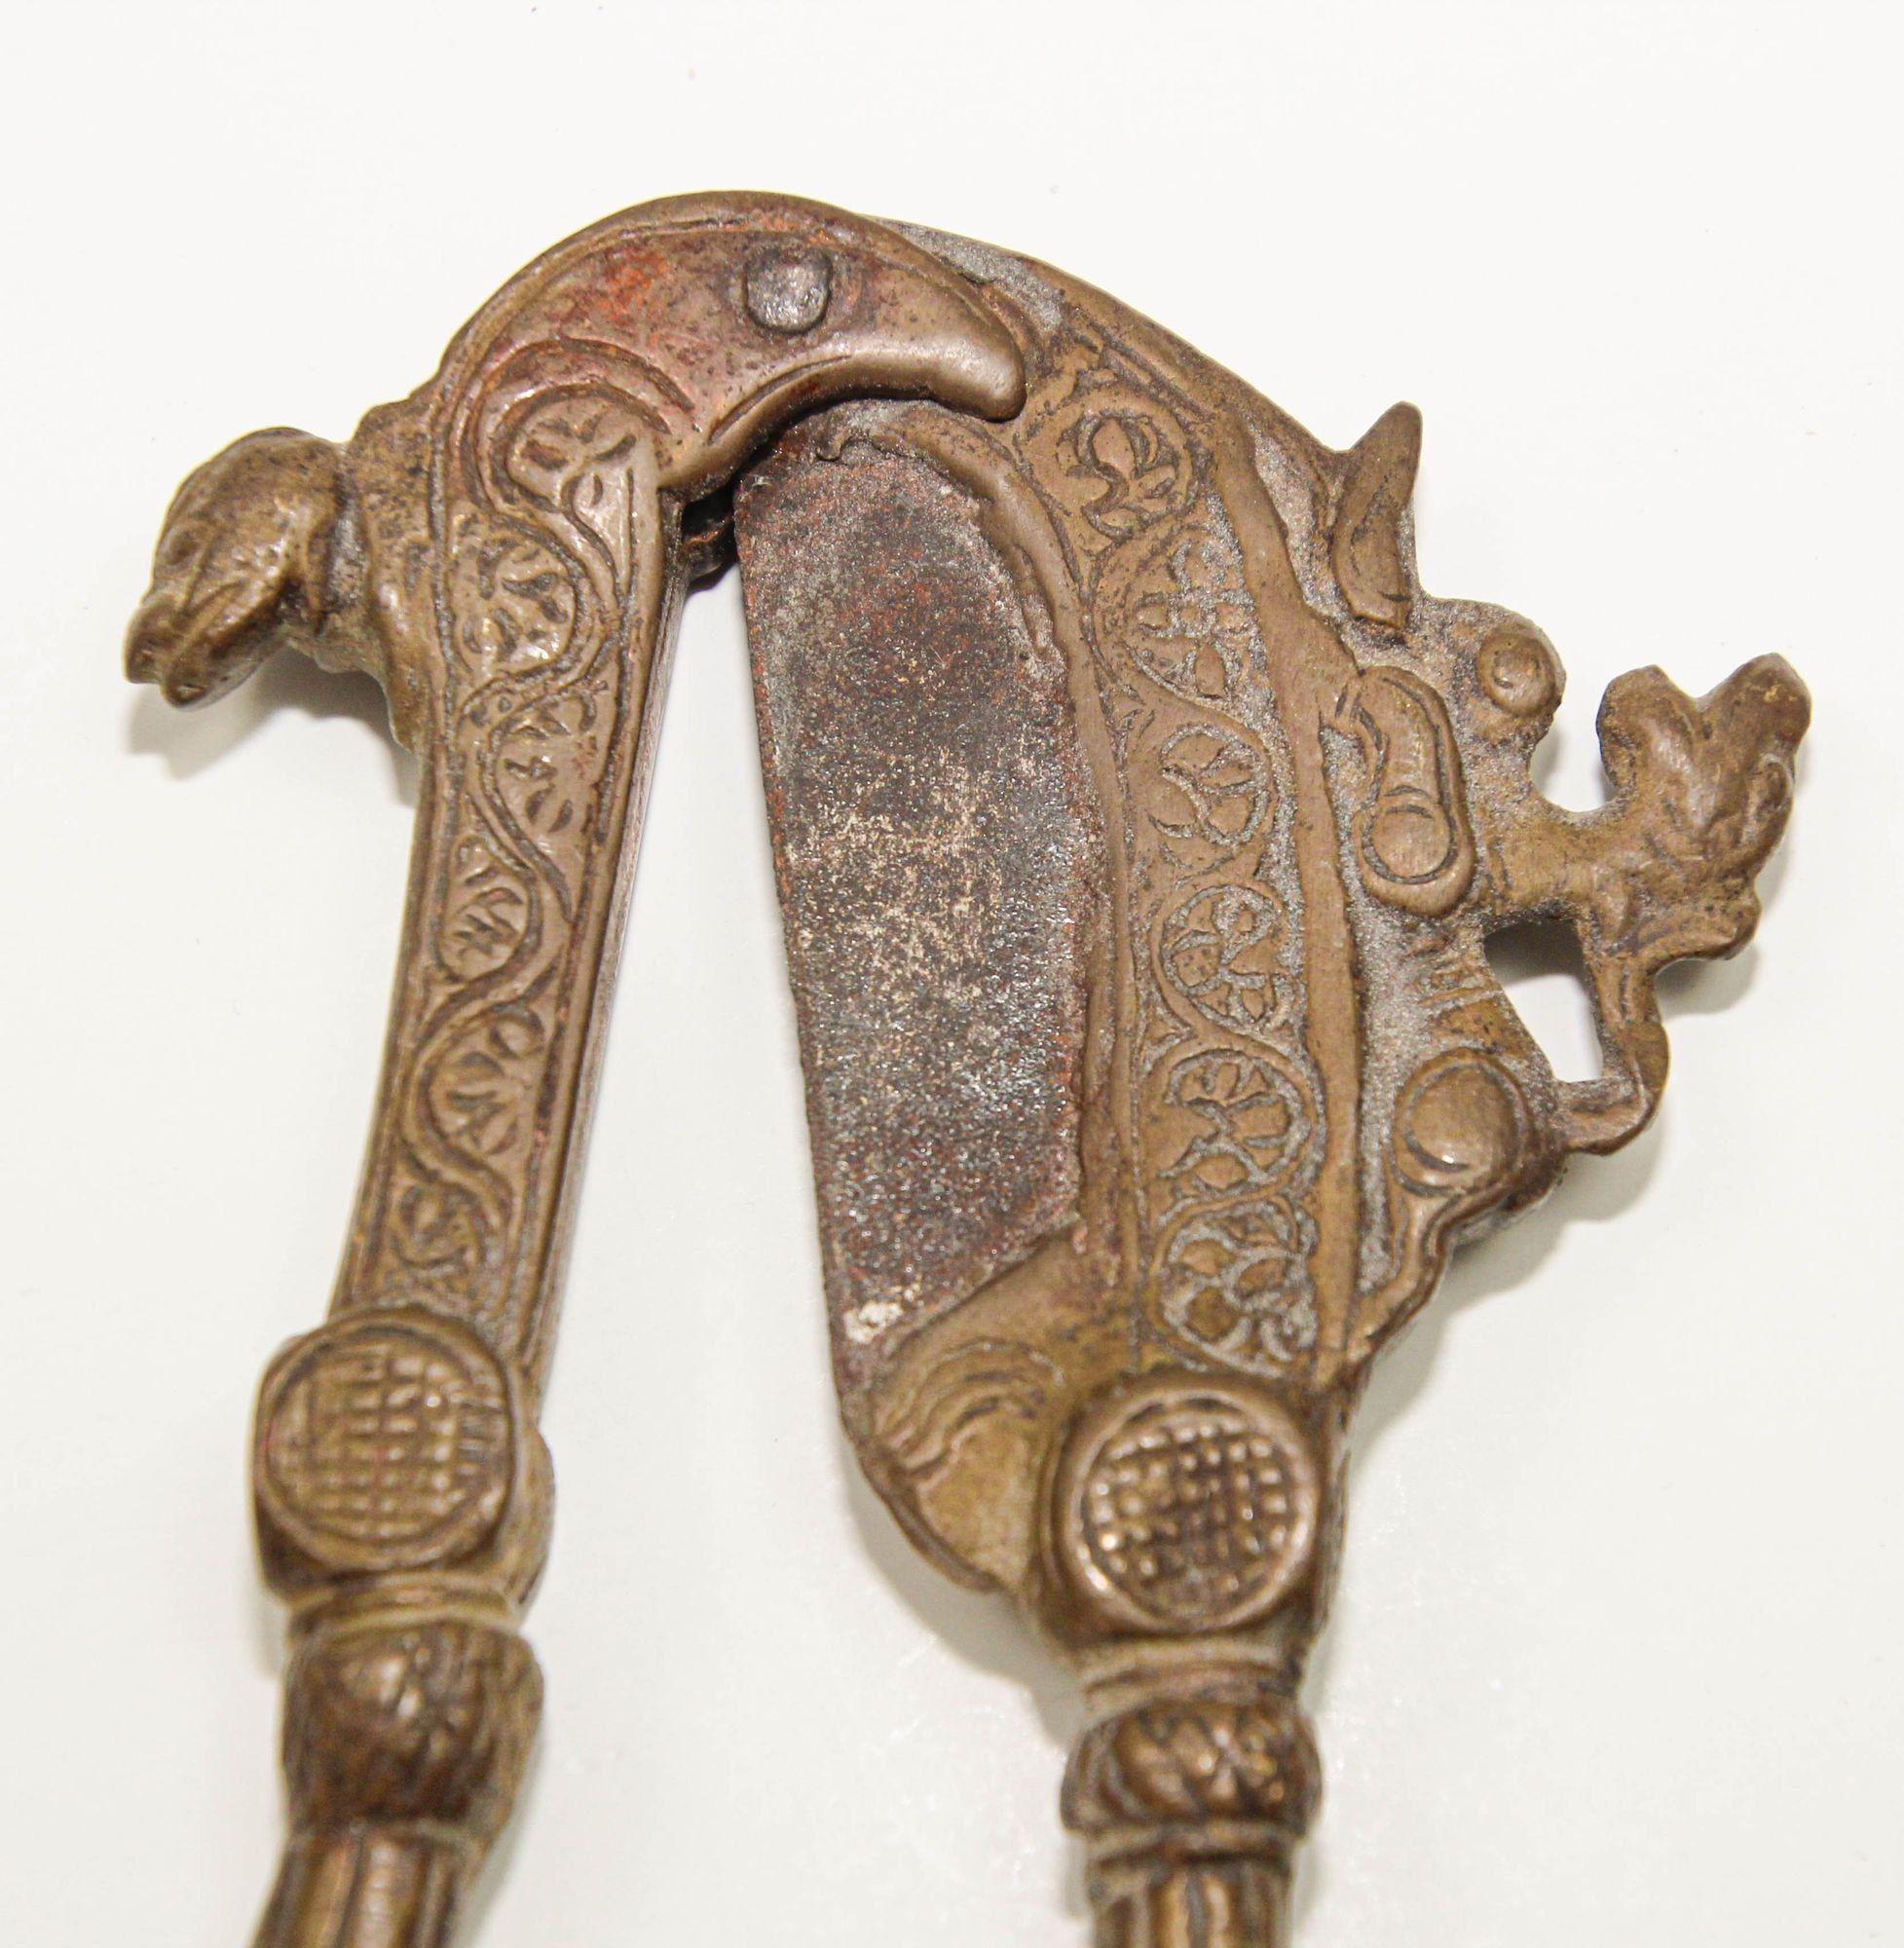 Hand-Carved Antique Brass Betel Nut Cutter from India Collectible Asian Artifact For Sale